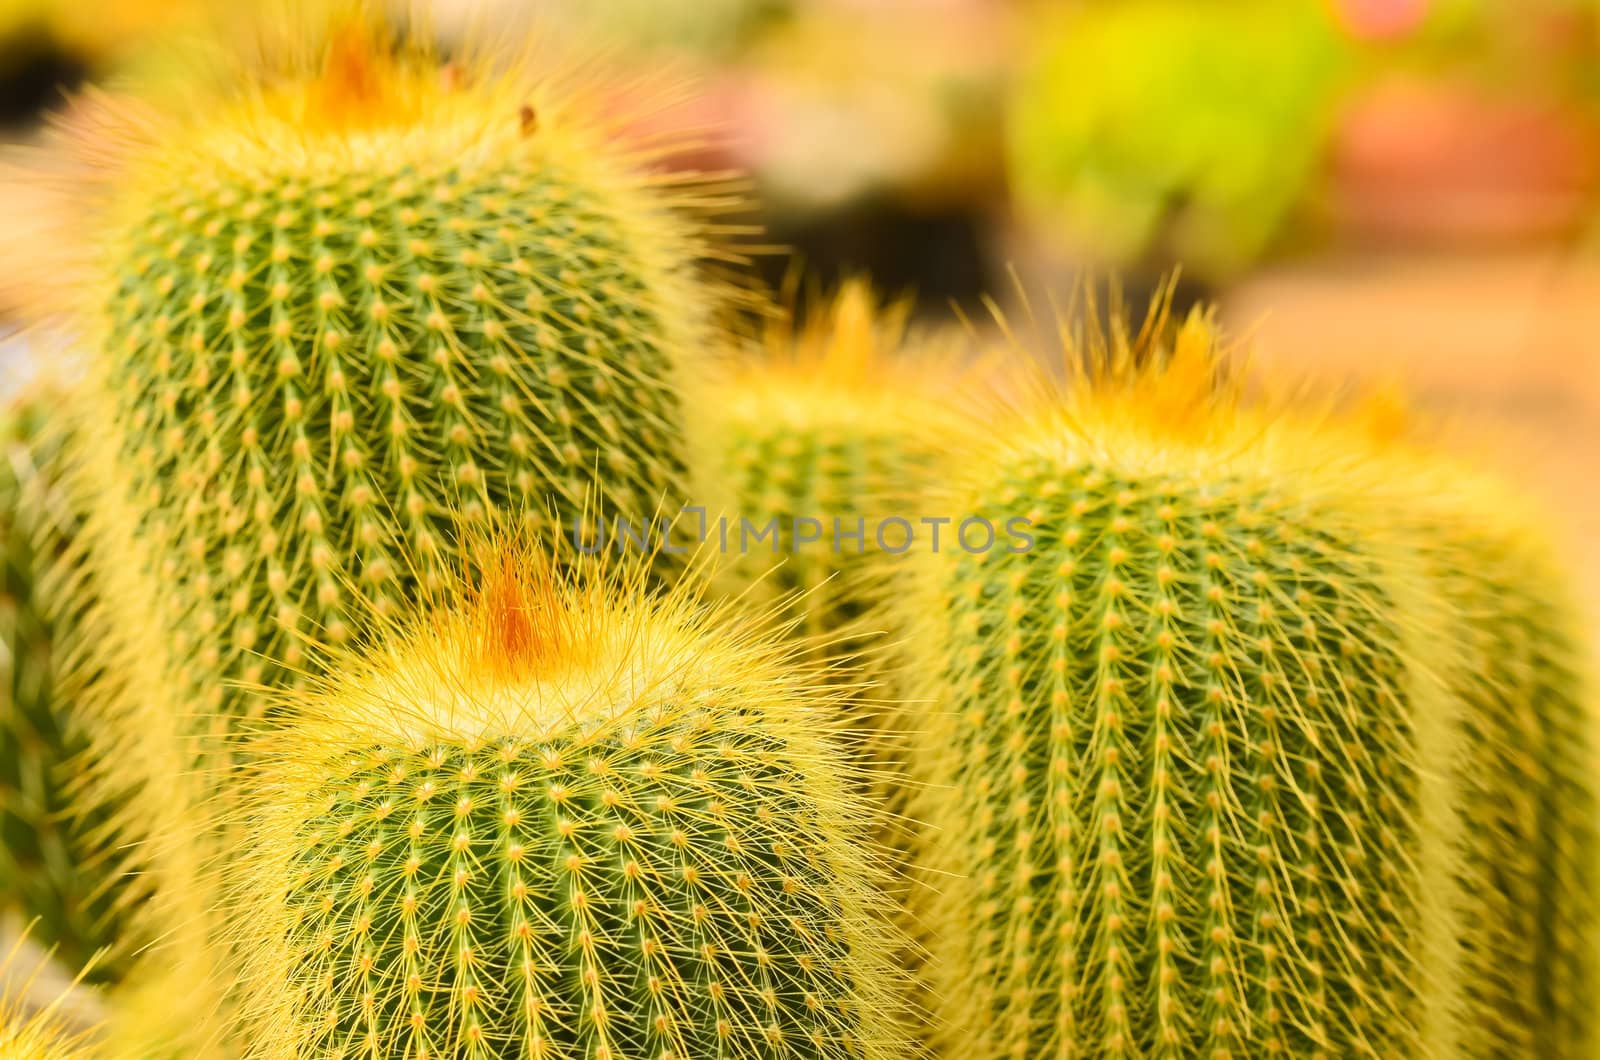 Cactus  in morning light. by raweenuttapong